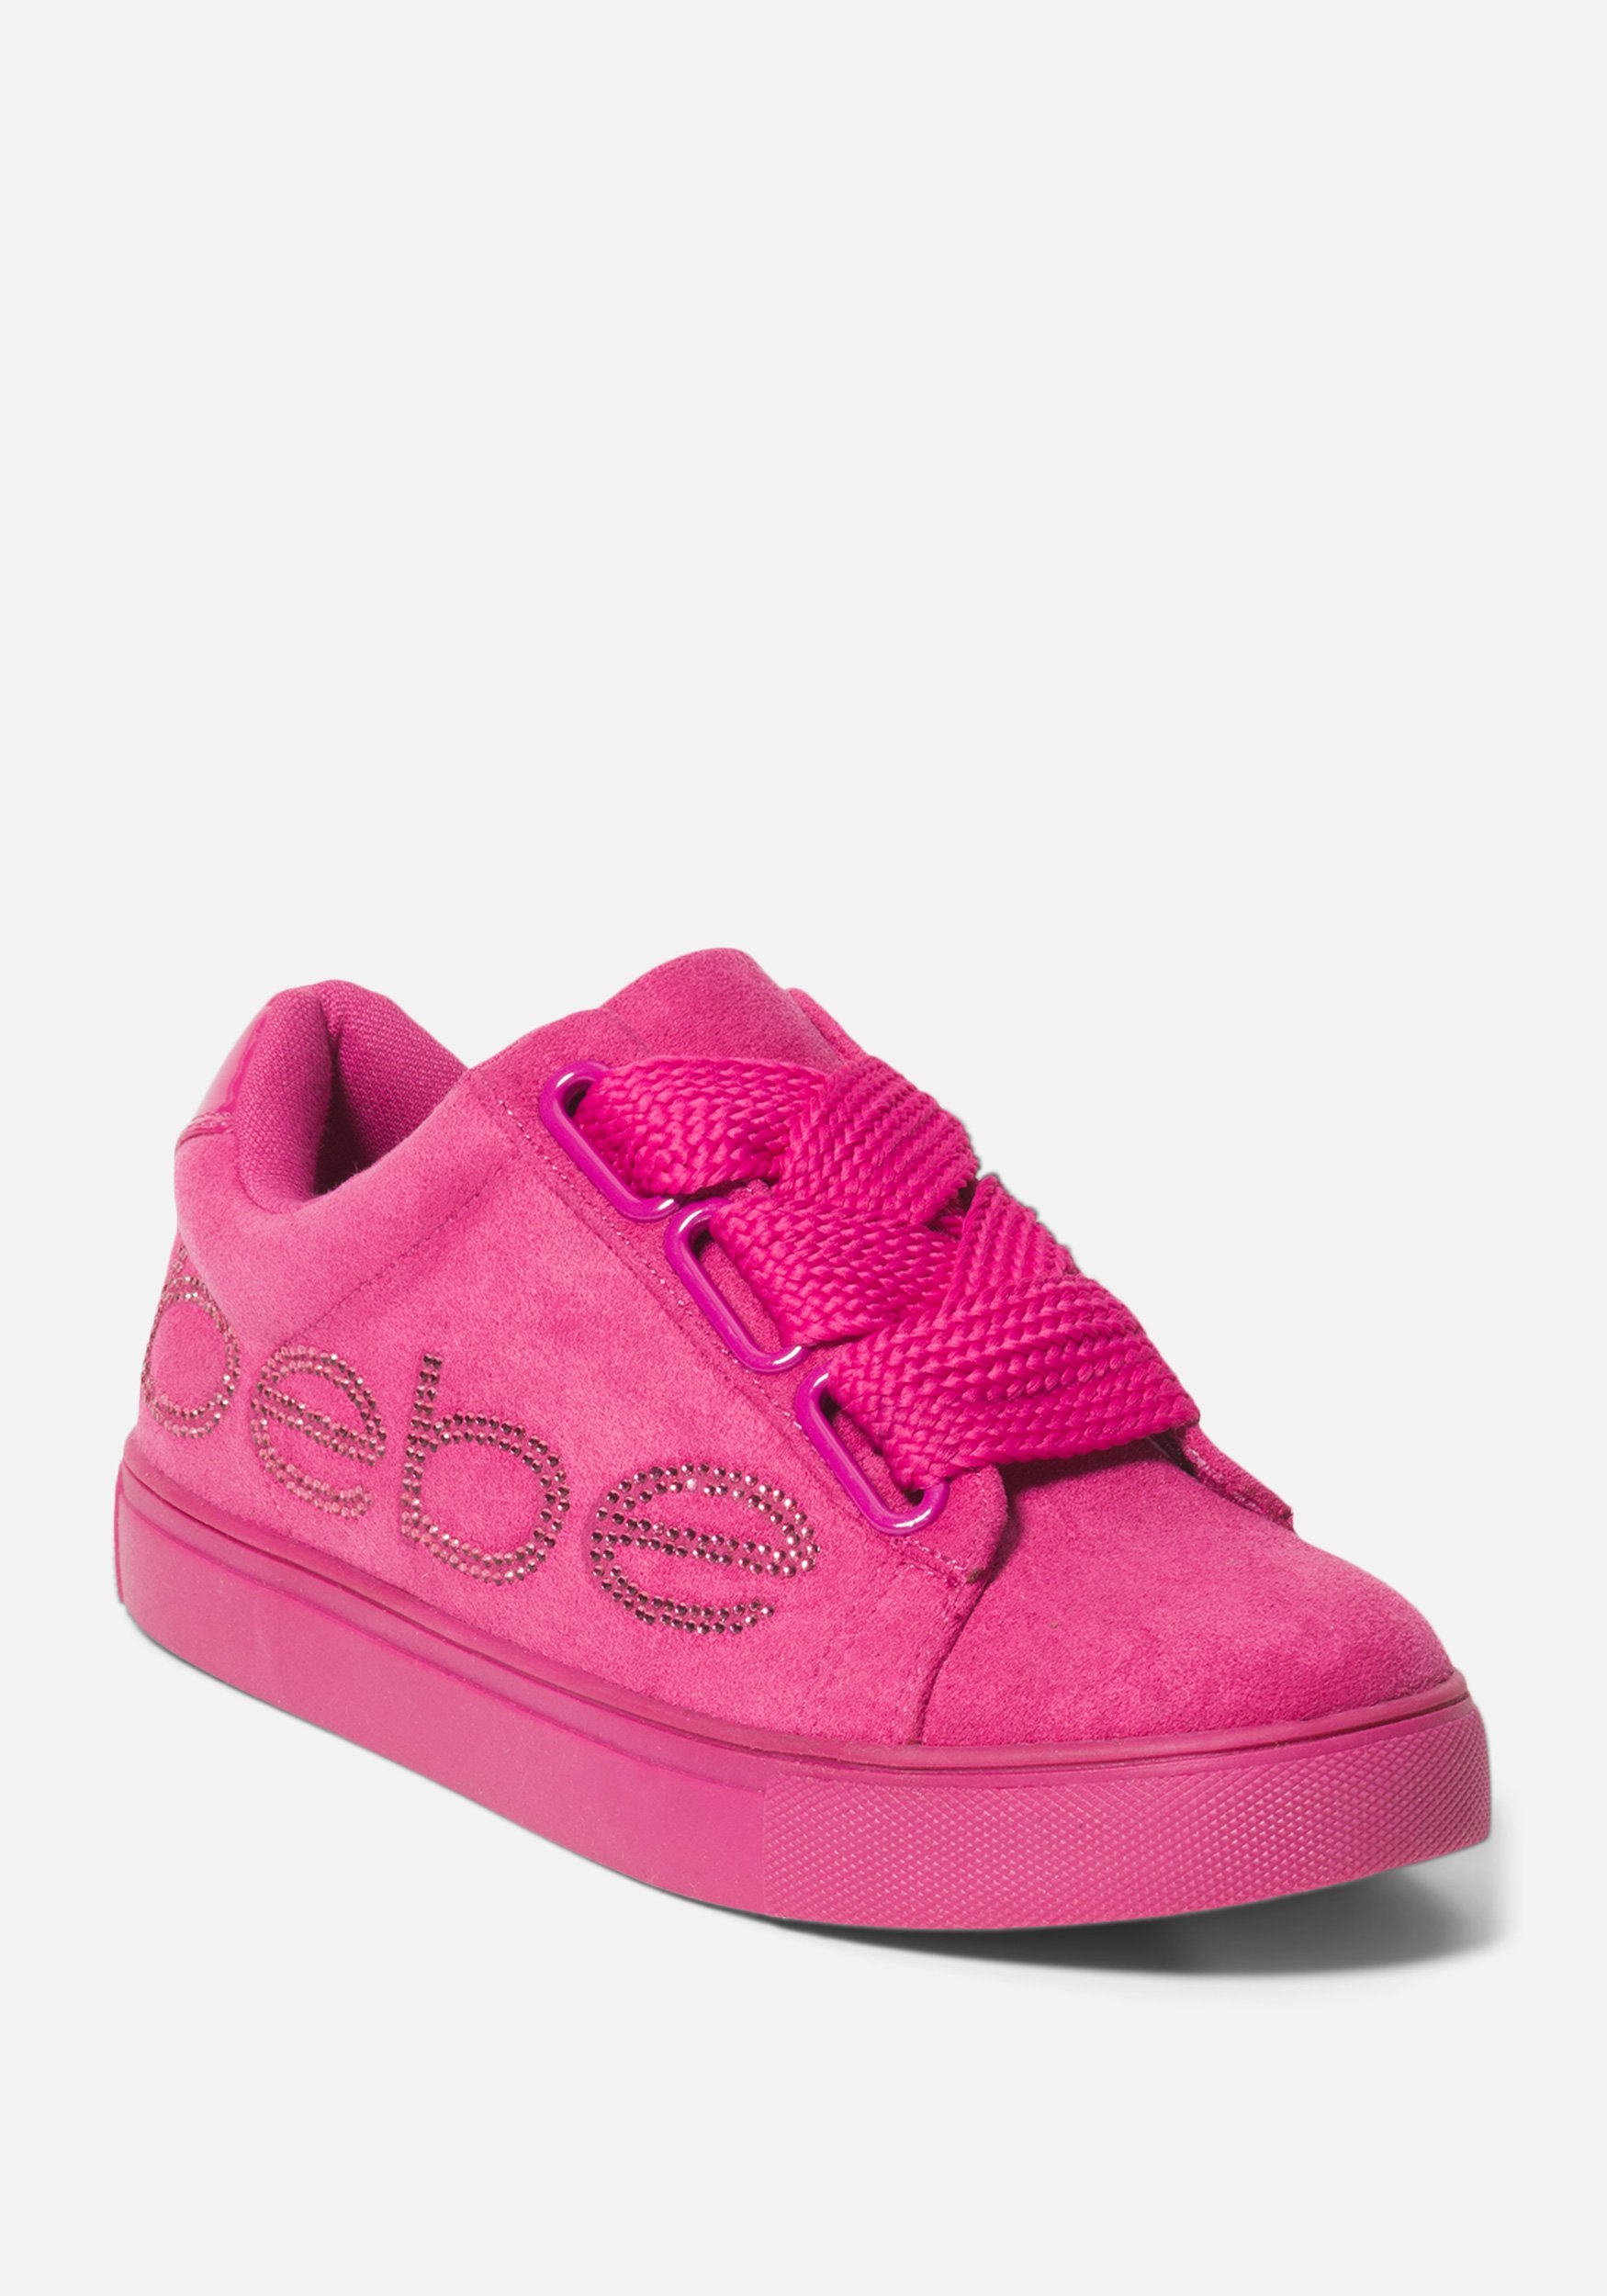 Women's Cabree Bebe Logo Sneakers, Size 7.5 in Hot Pink Synthetic